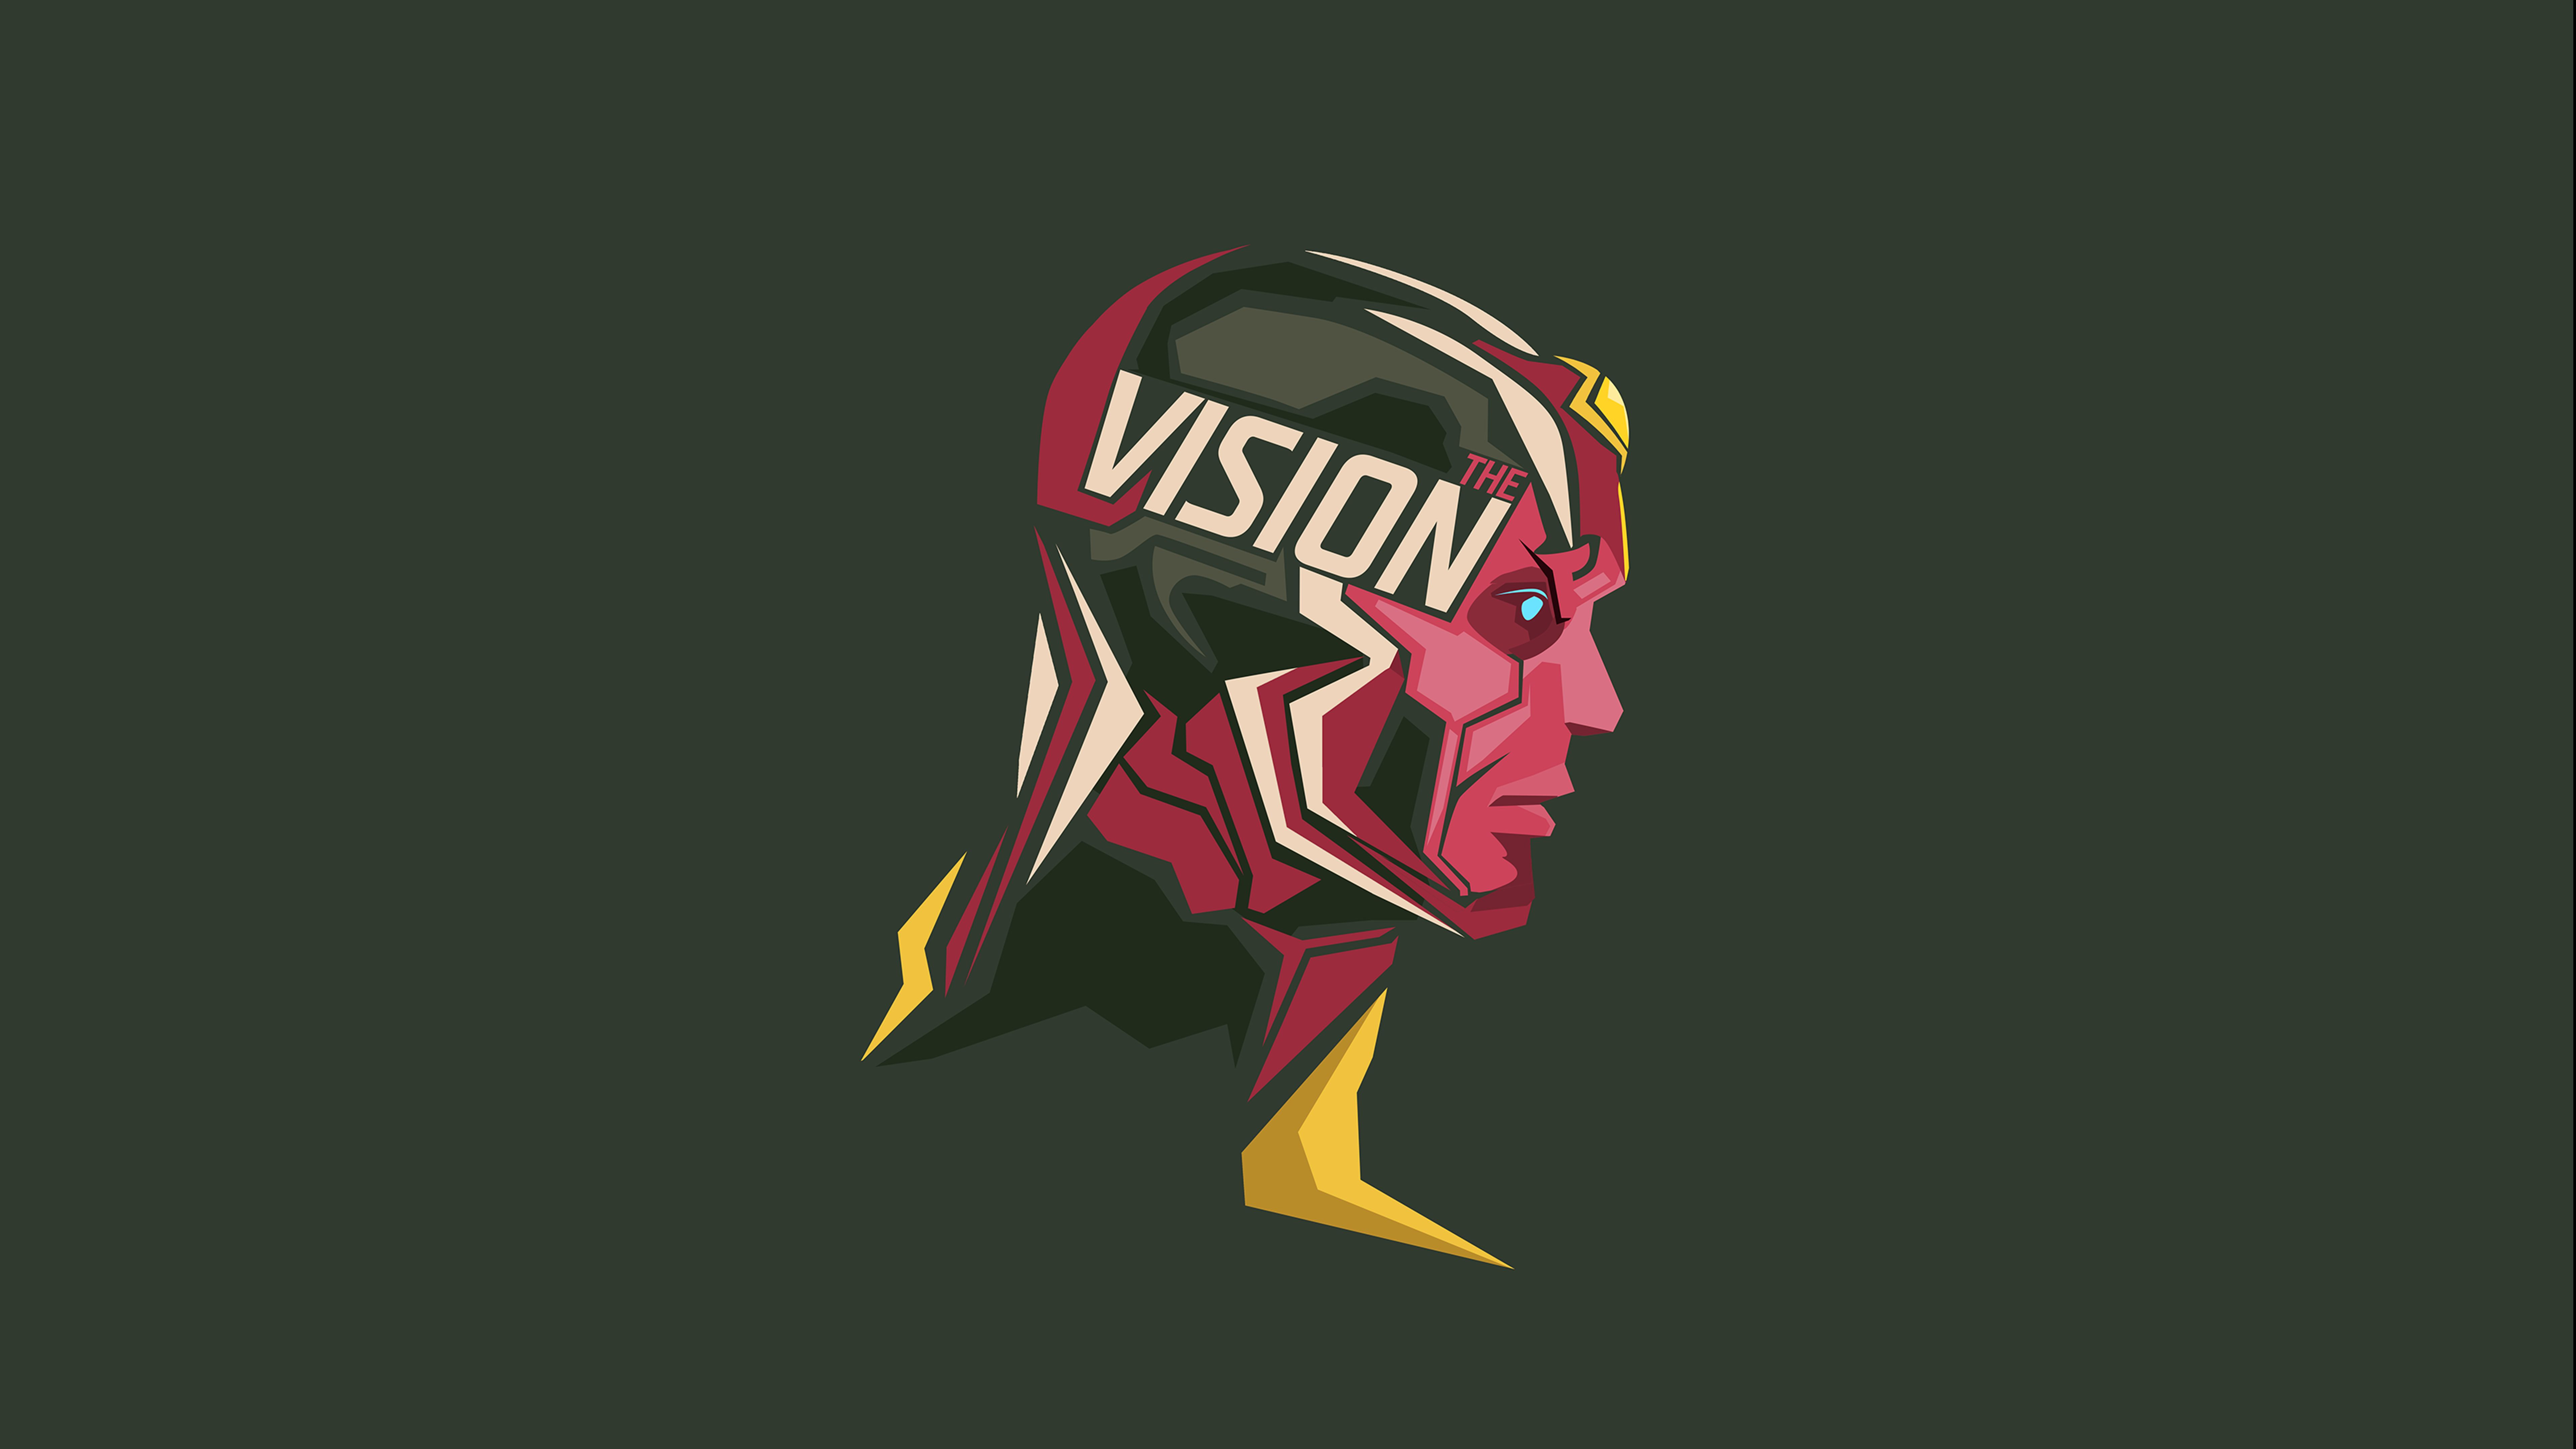 Cool Vision Backgrounds